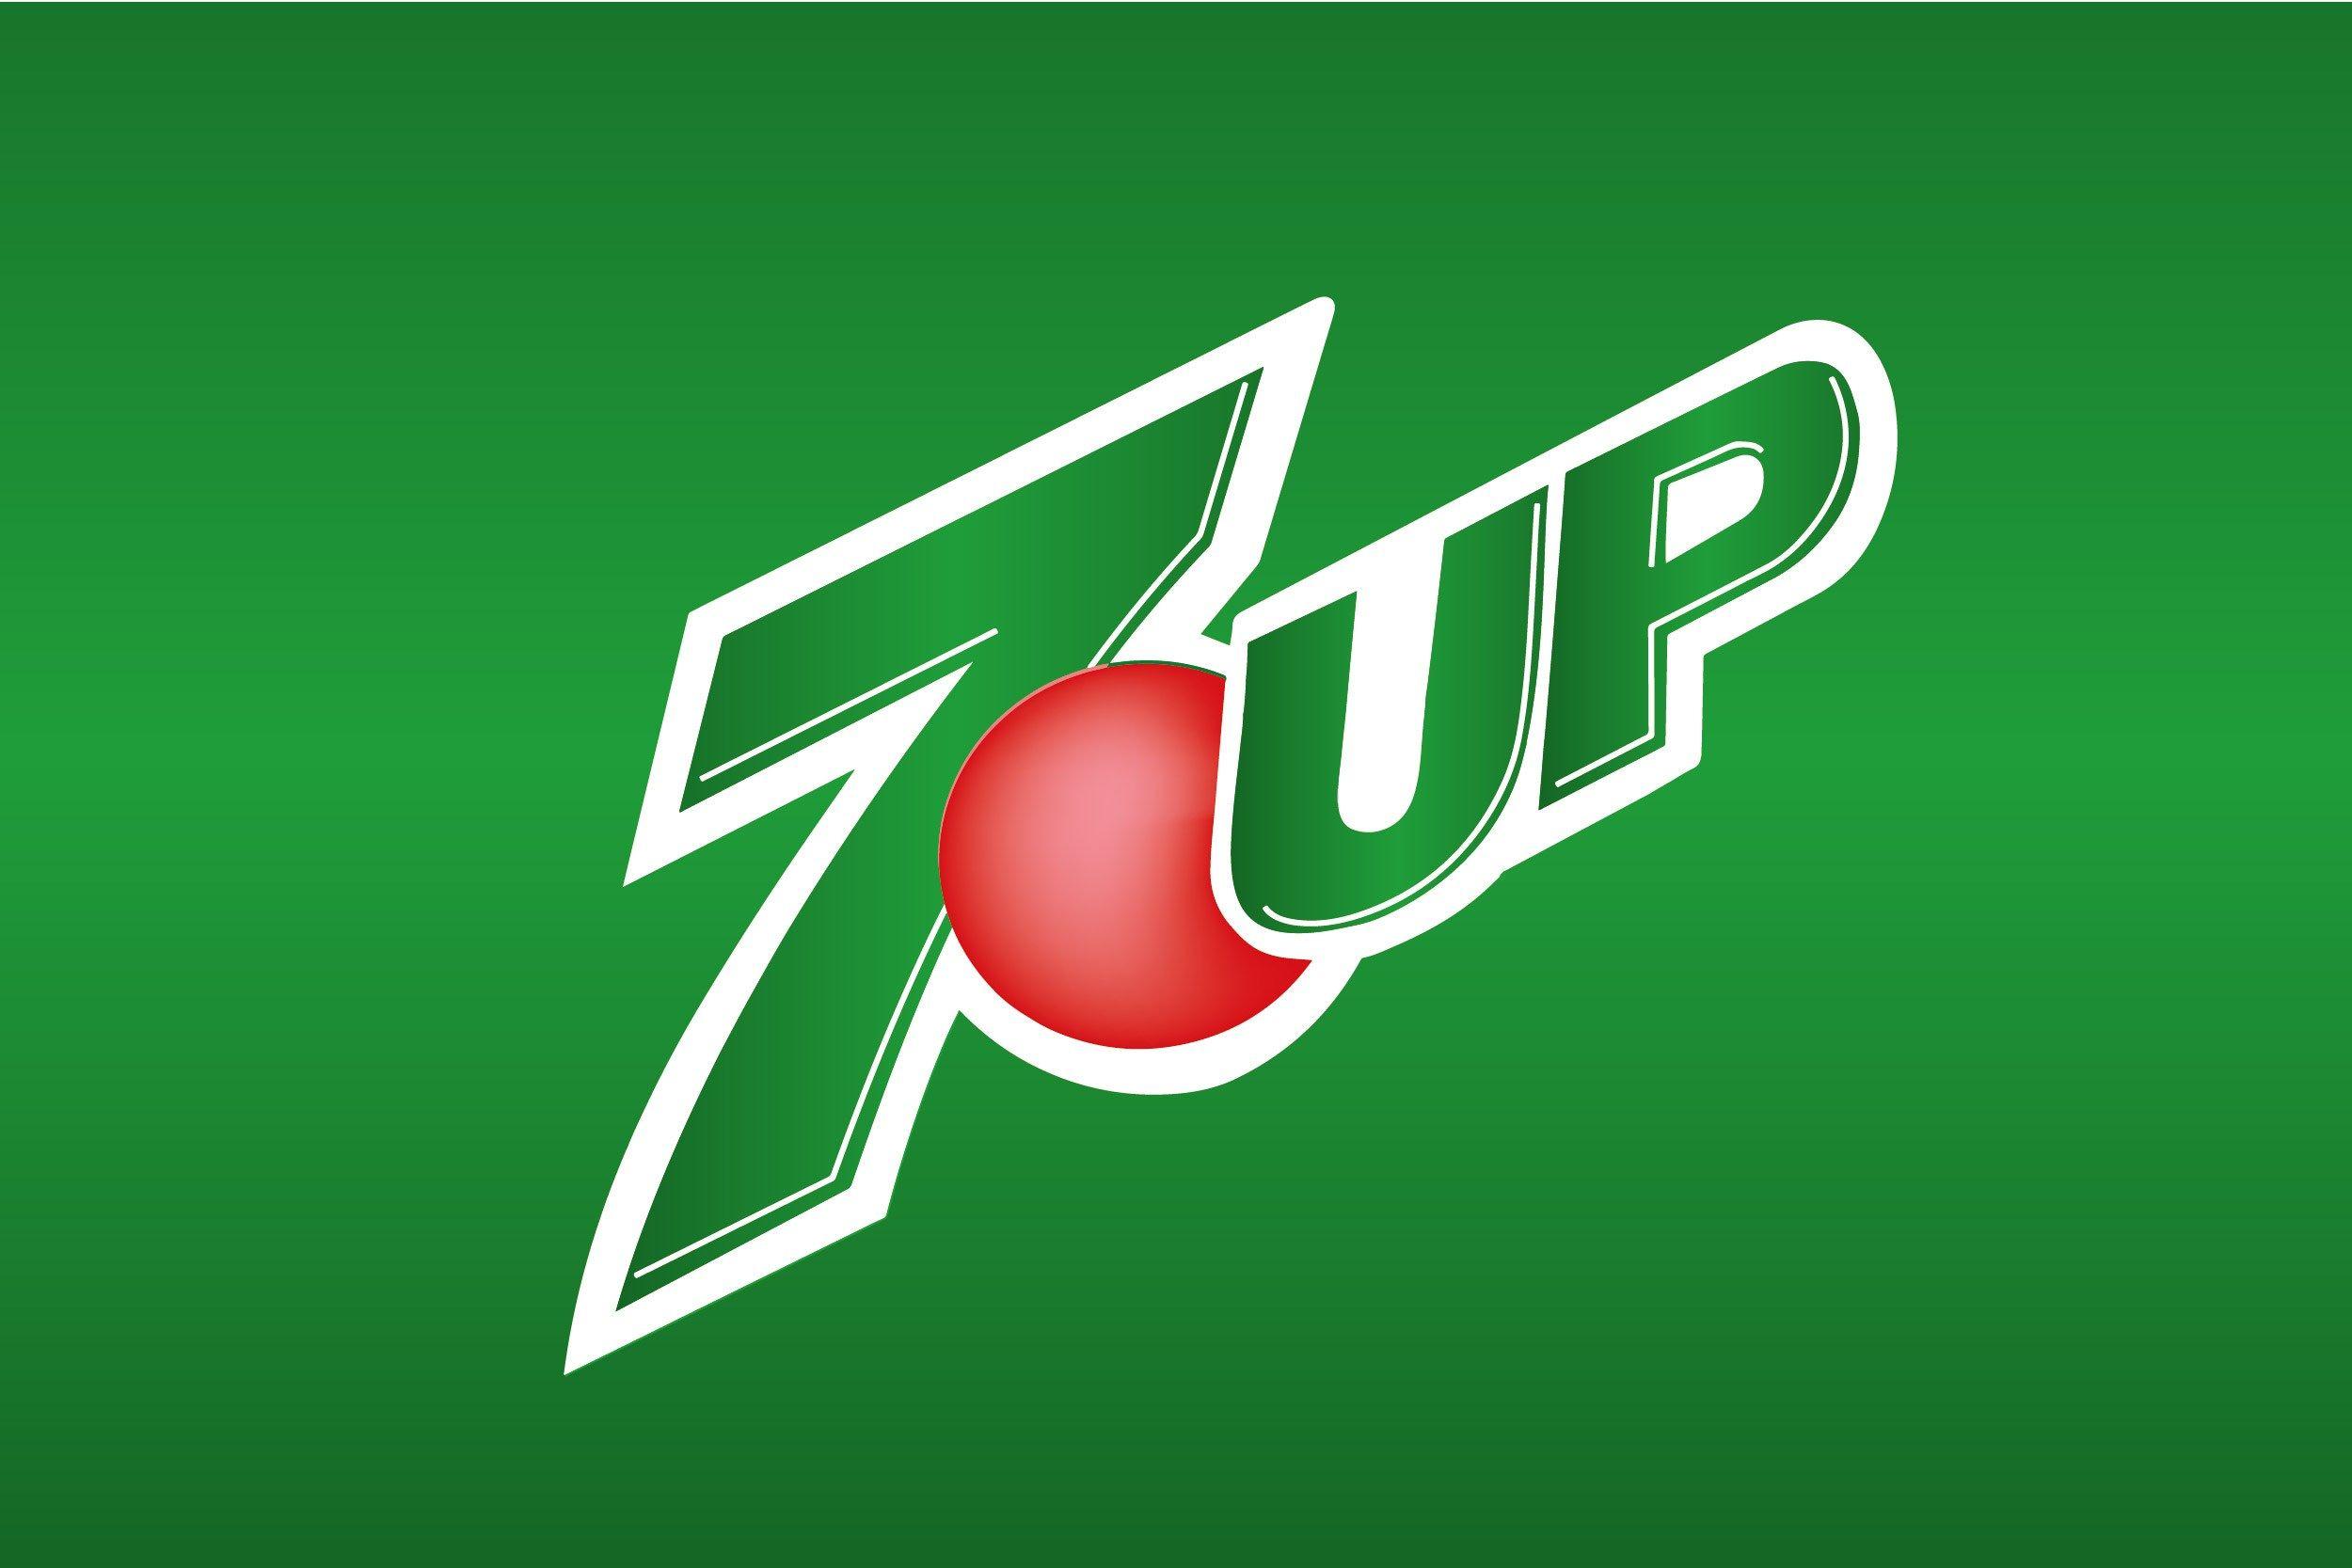 Seven Up Logo - Shareholders Approve 7 Up's Takeover By Affelka